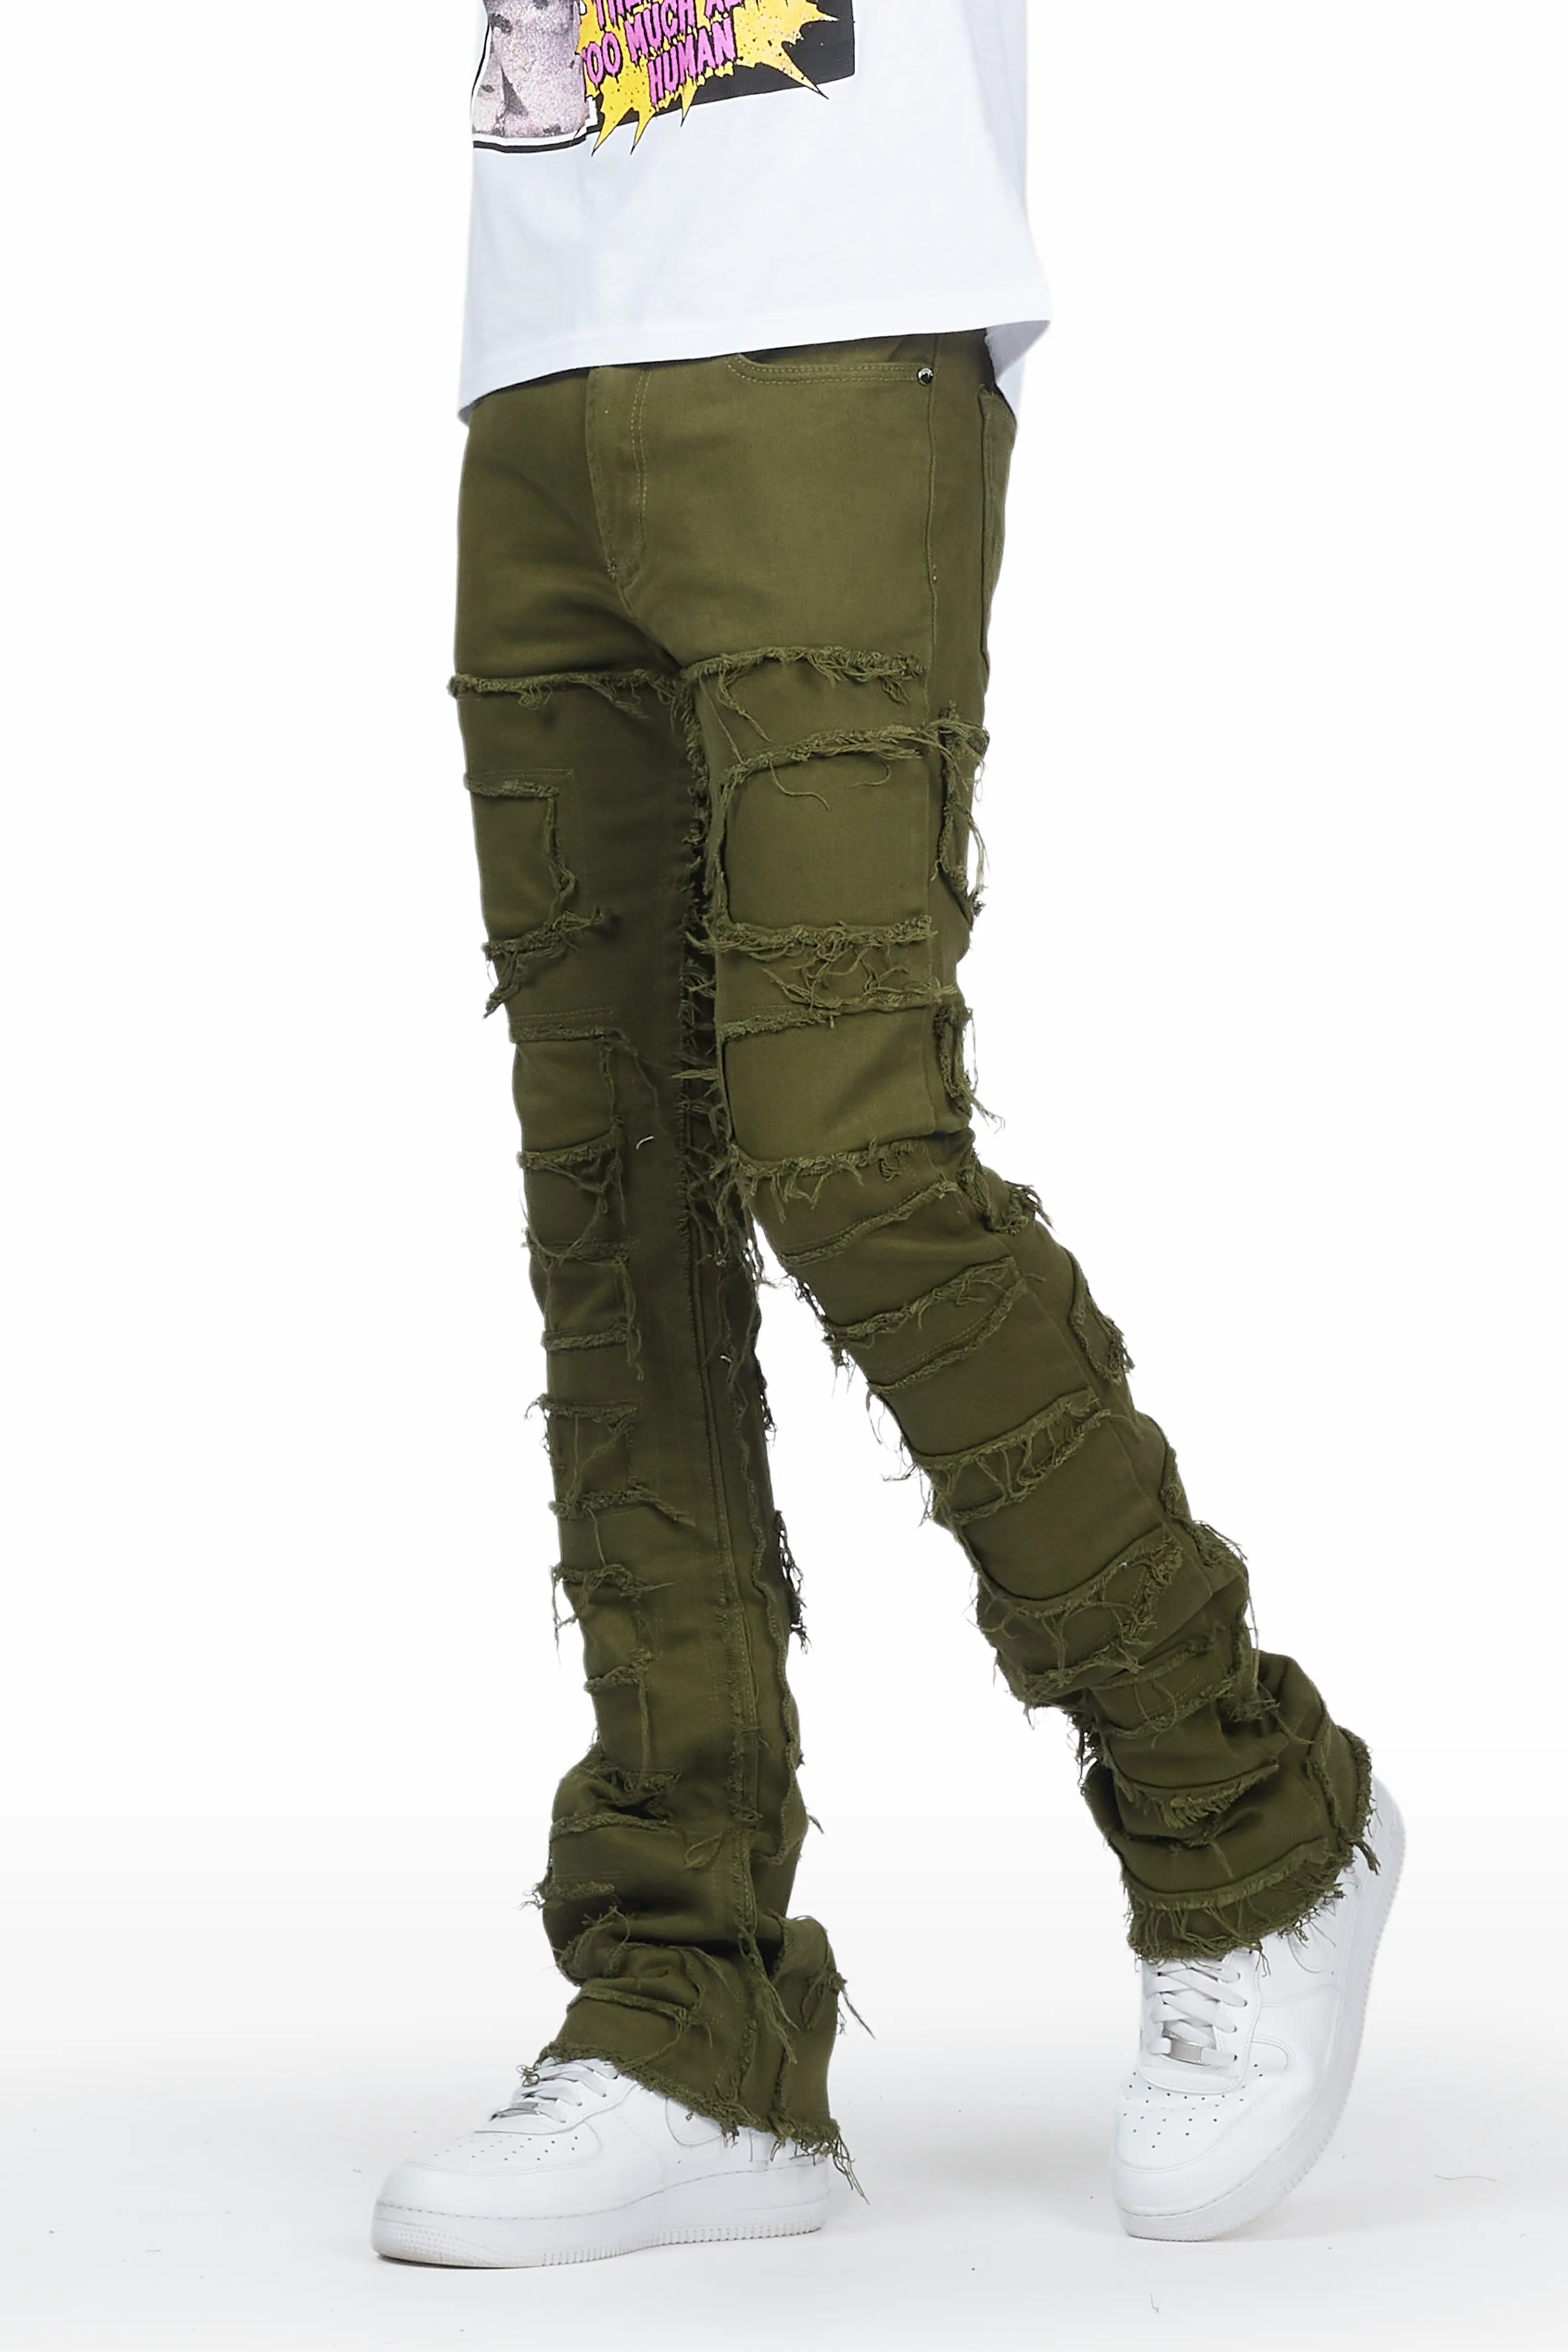 Shake Green Stacked Flare Jean